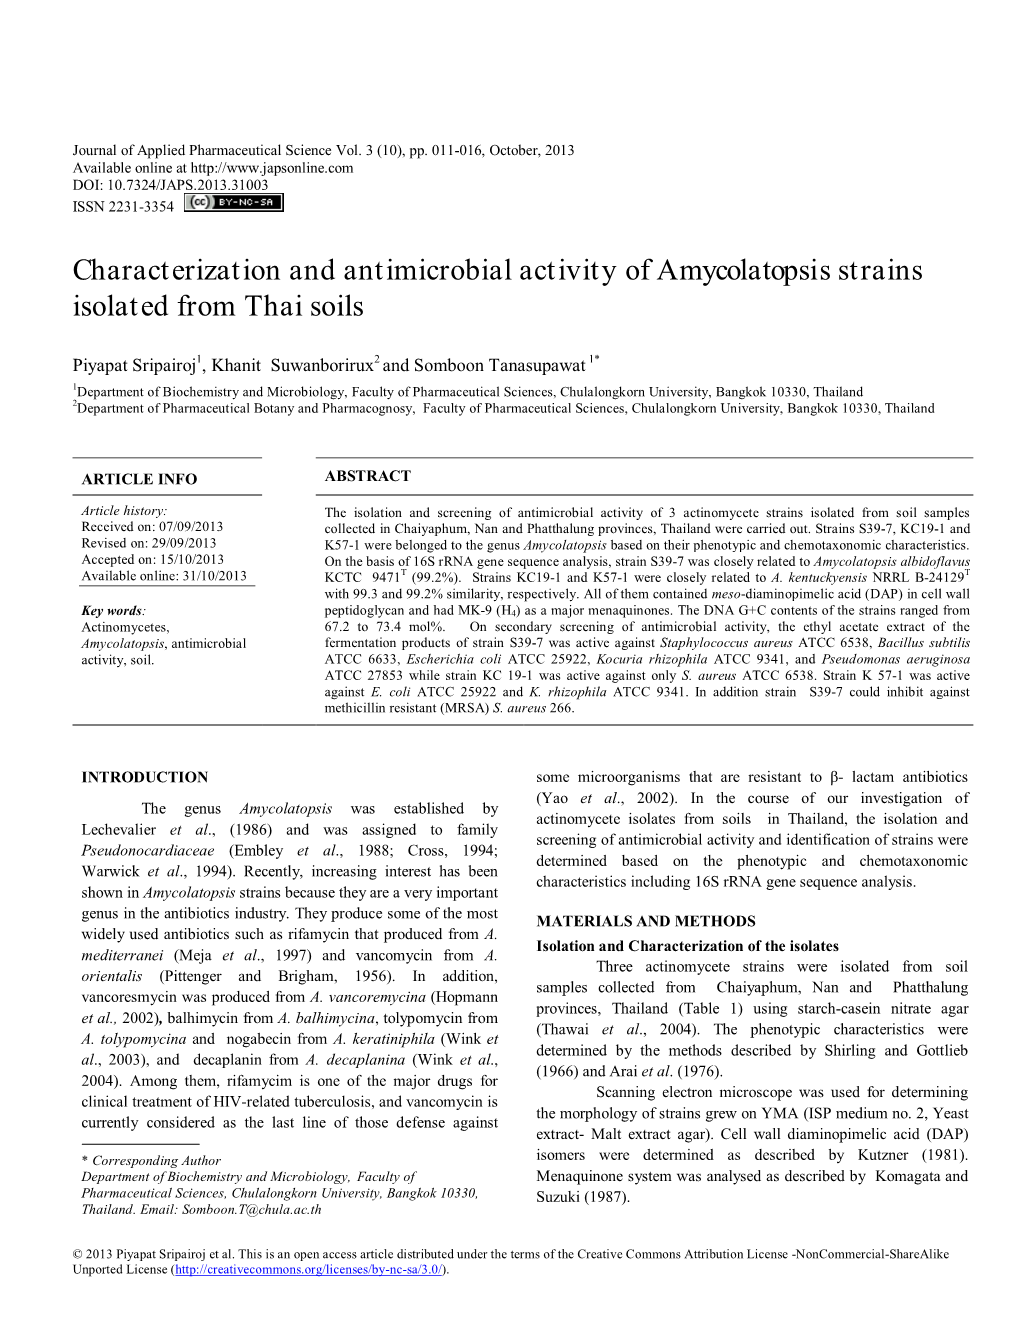 Amycolatopsis Strains Isolated from Thai Soils